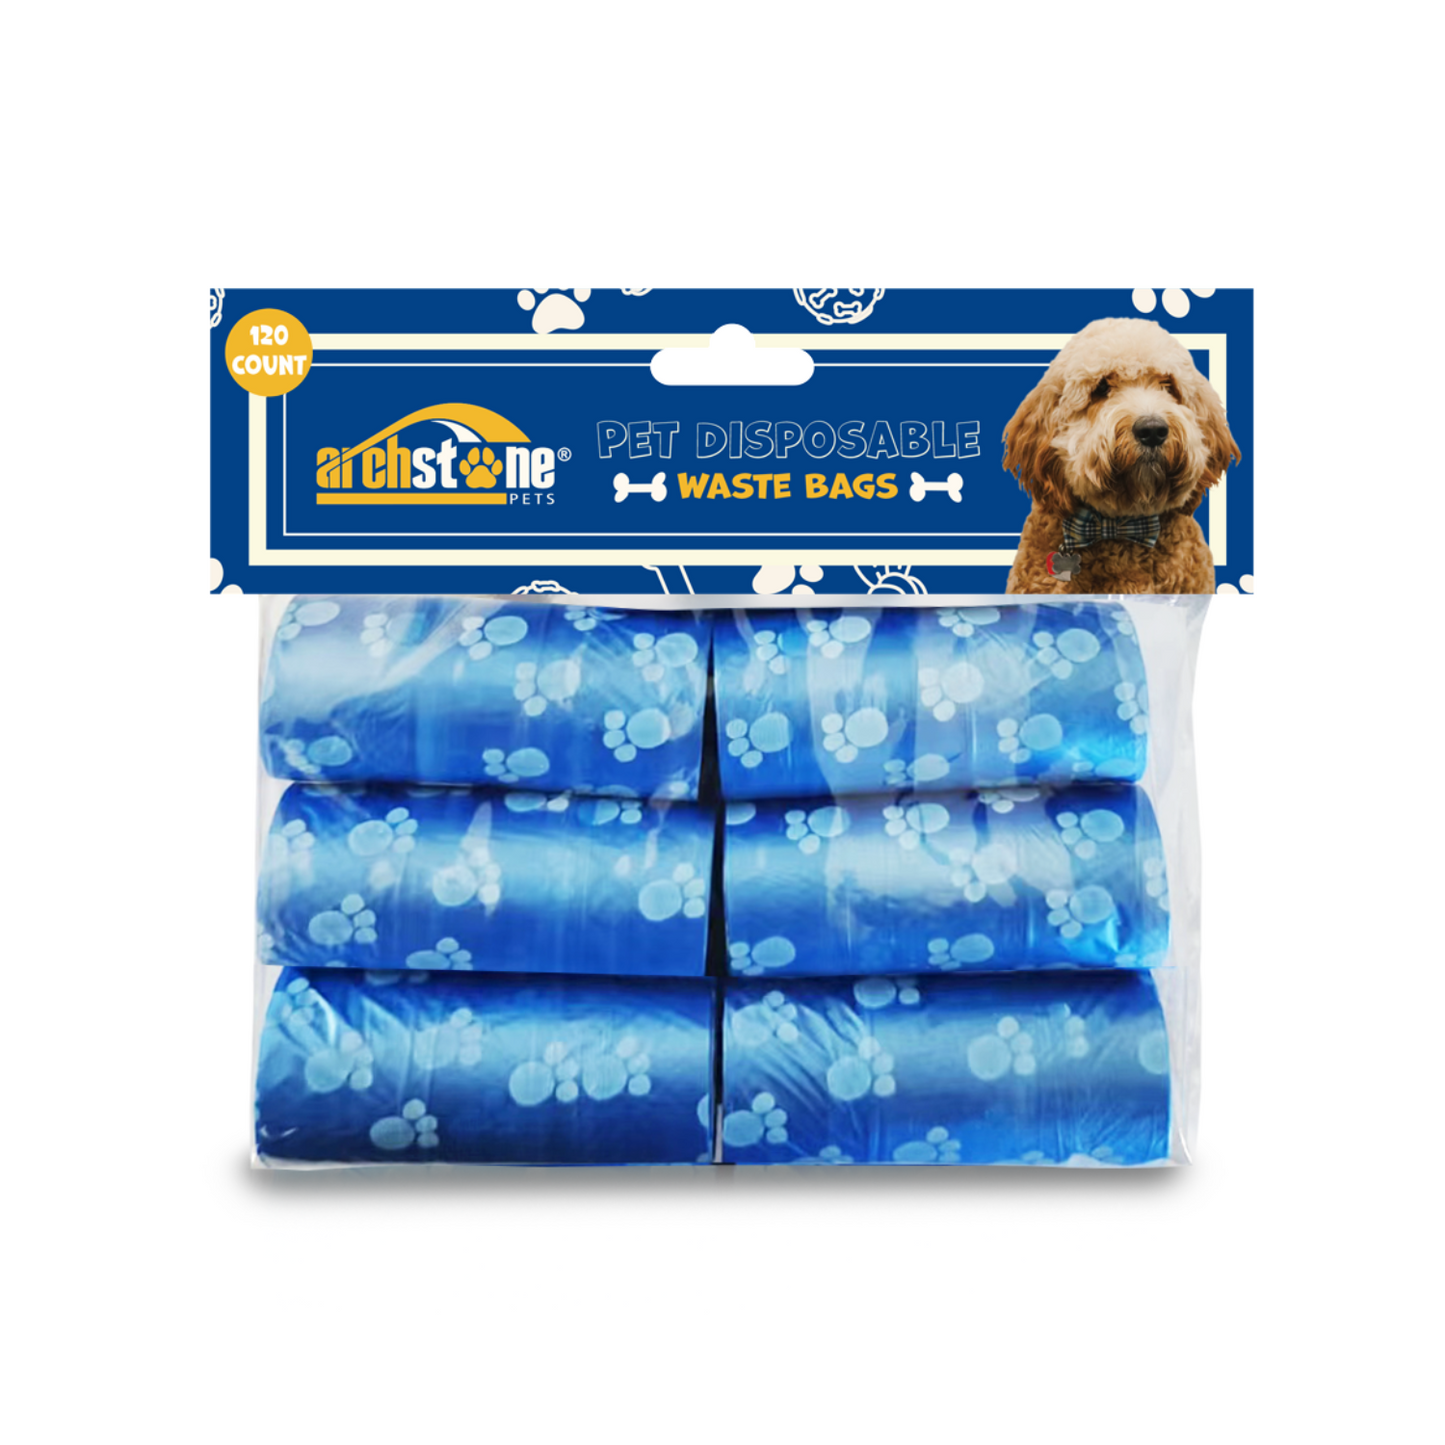 Pet Disposable Waste Bags (120 Count)